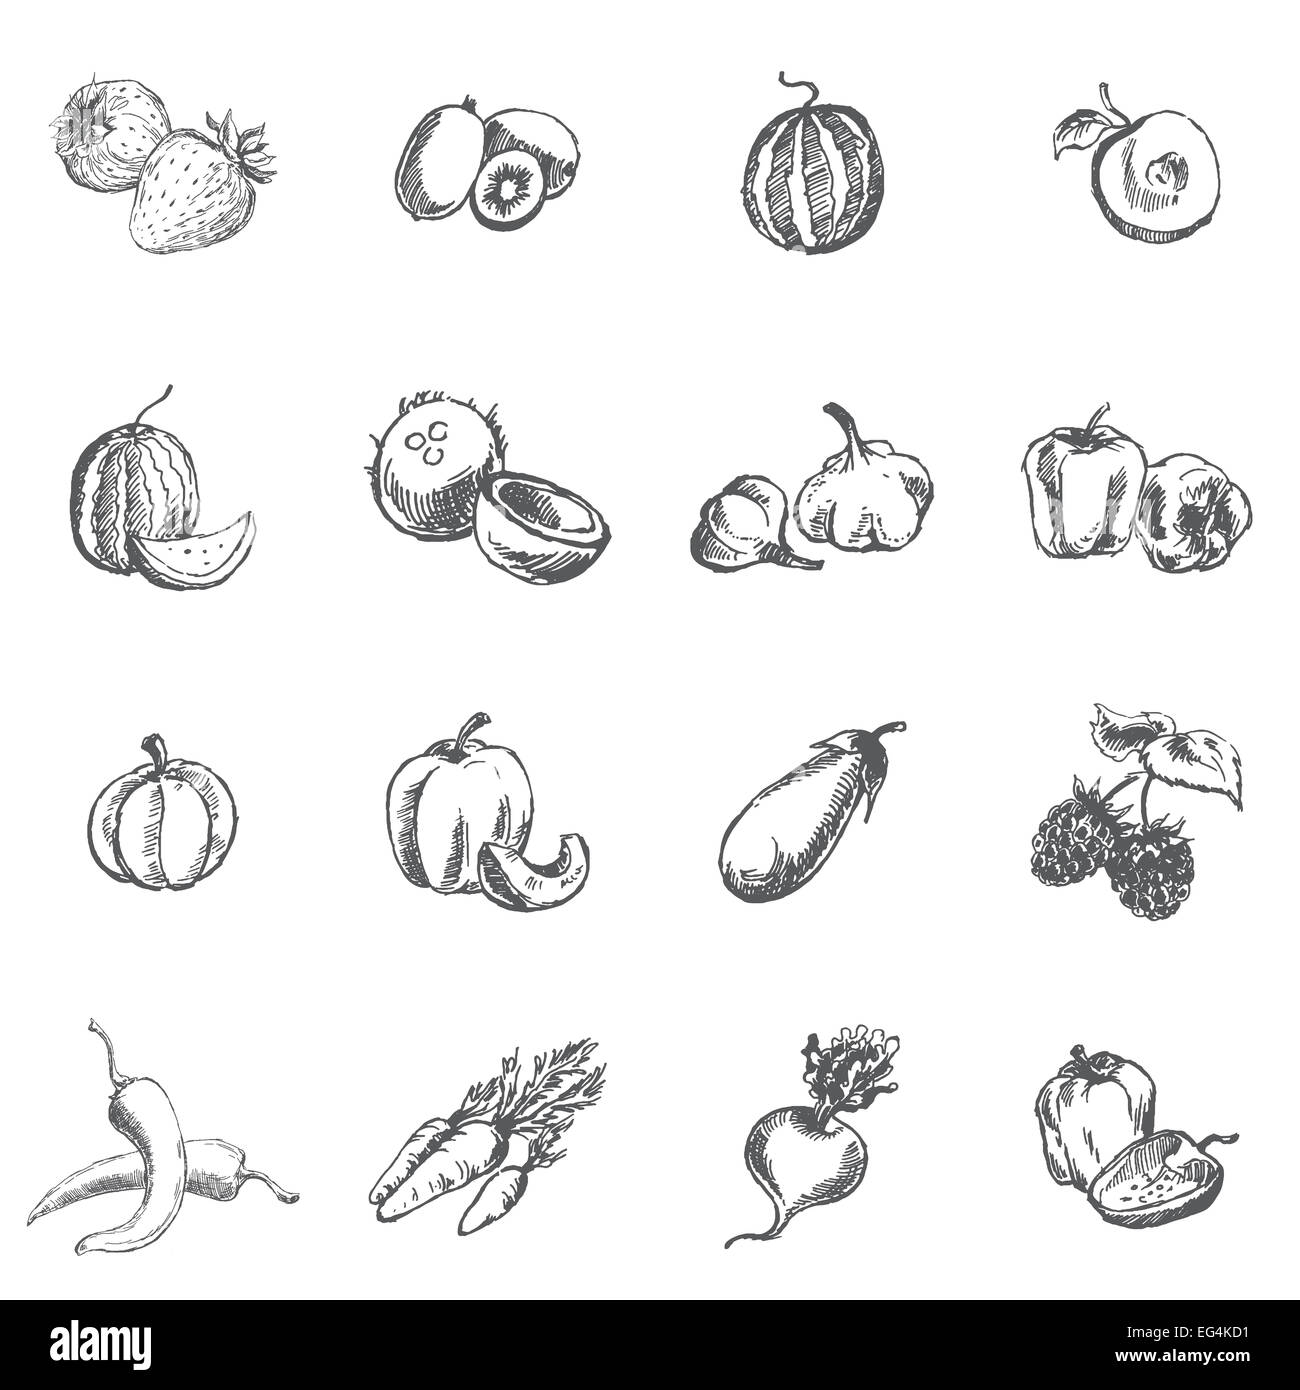 Vegetables, berries and fruits. Pen sketch converted to vectors. Stock Photo